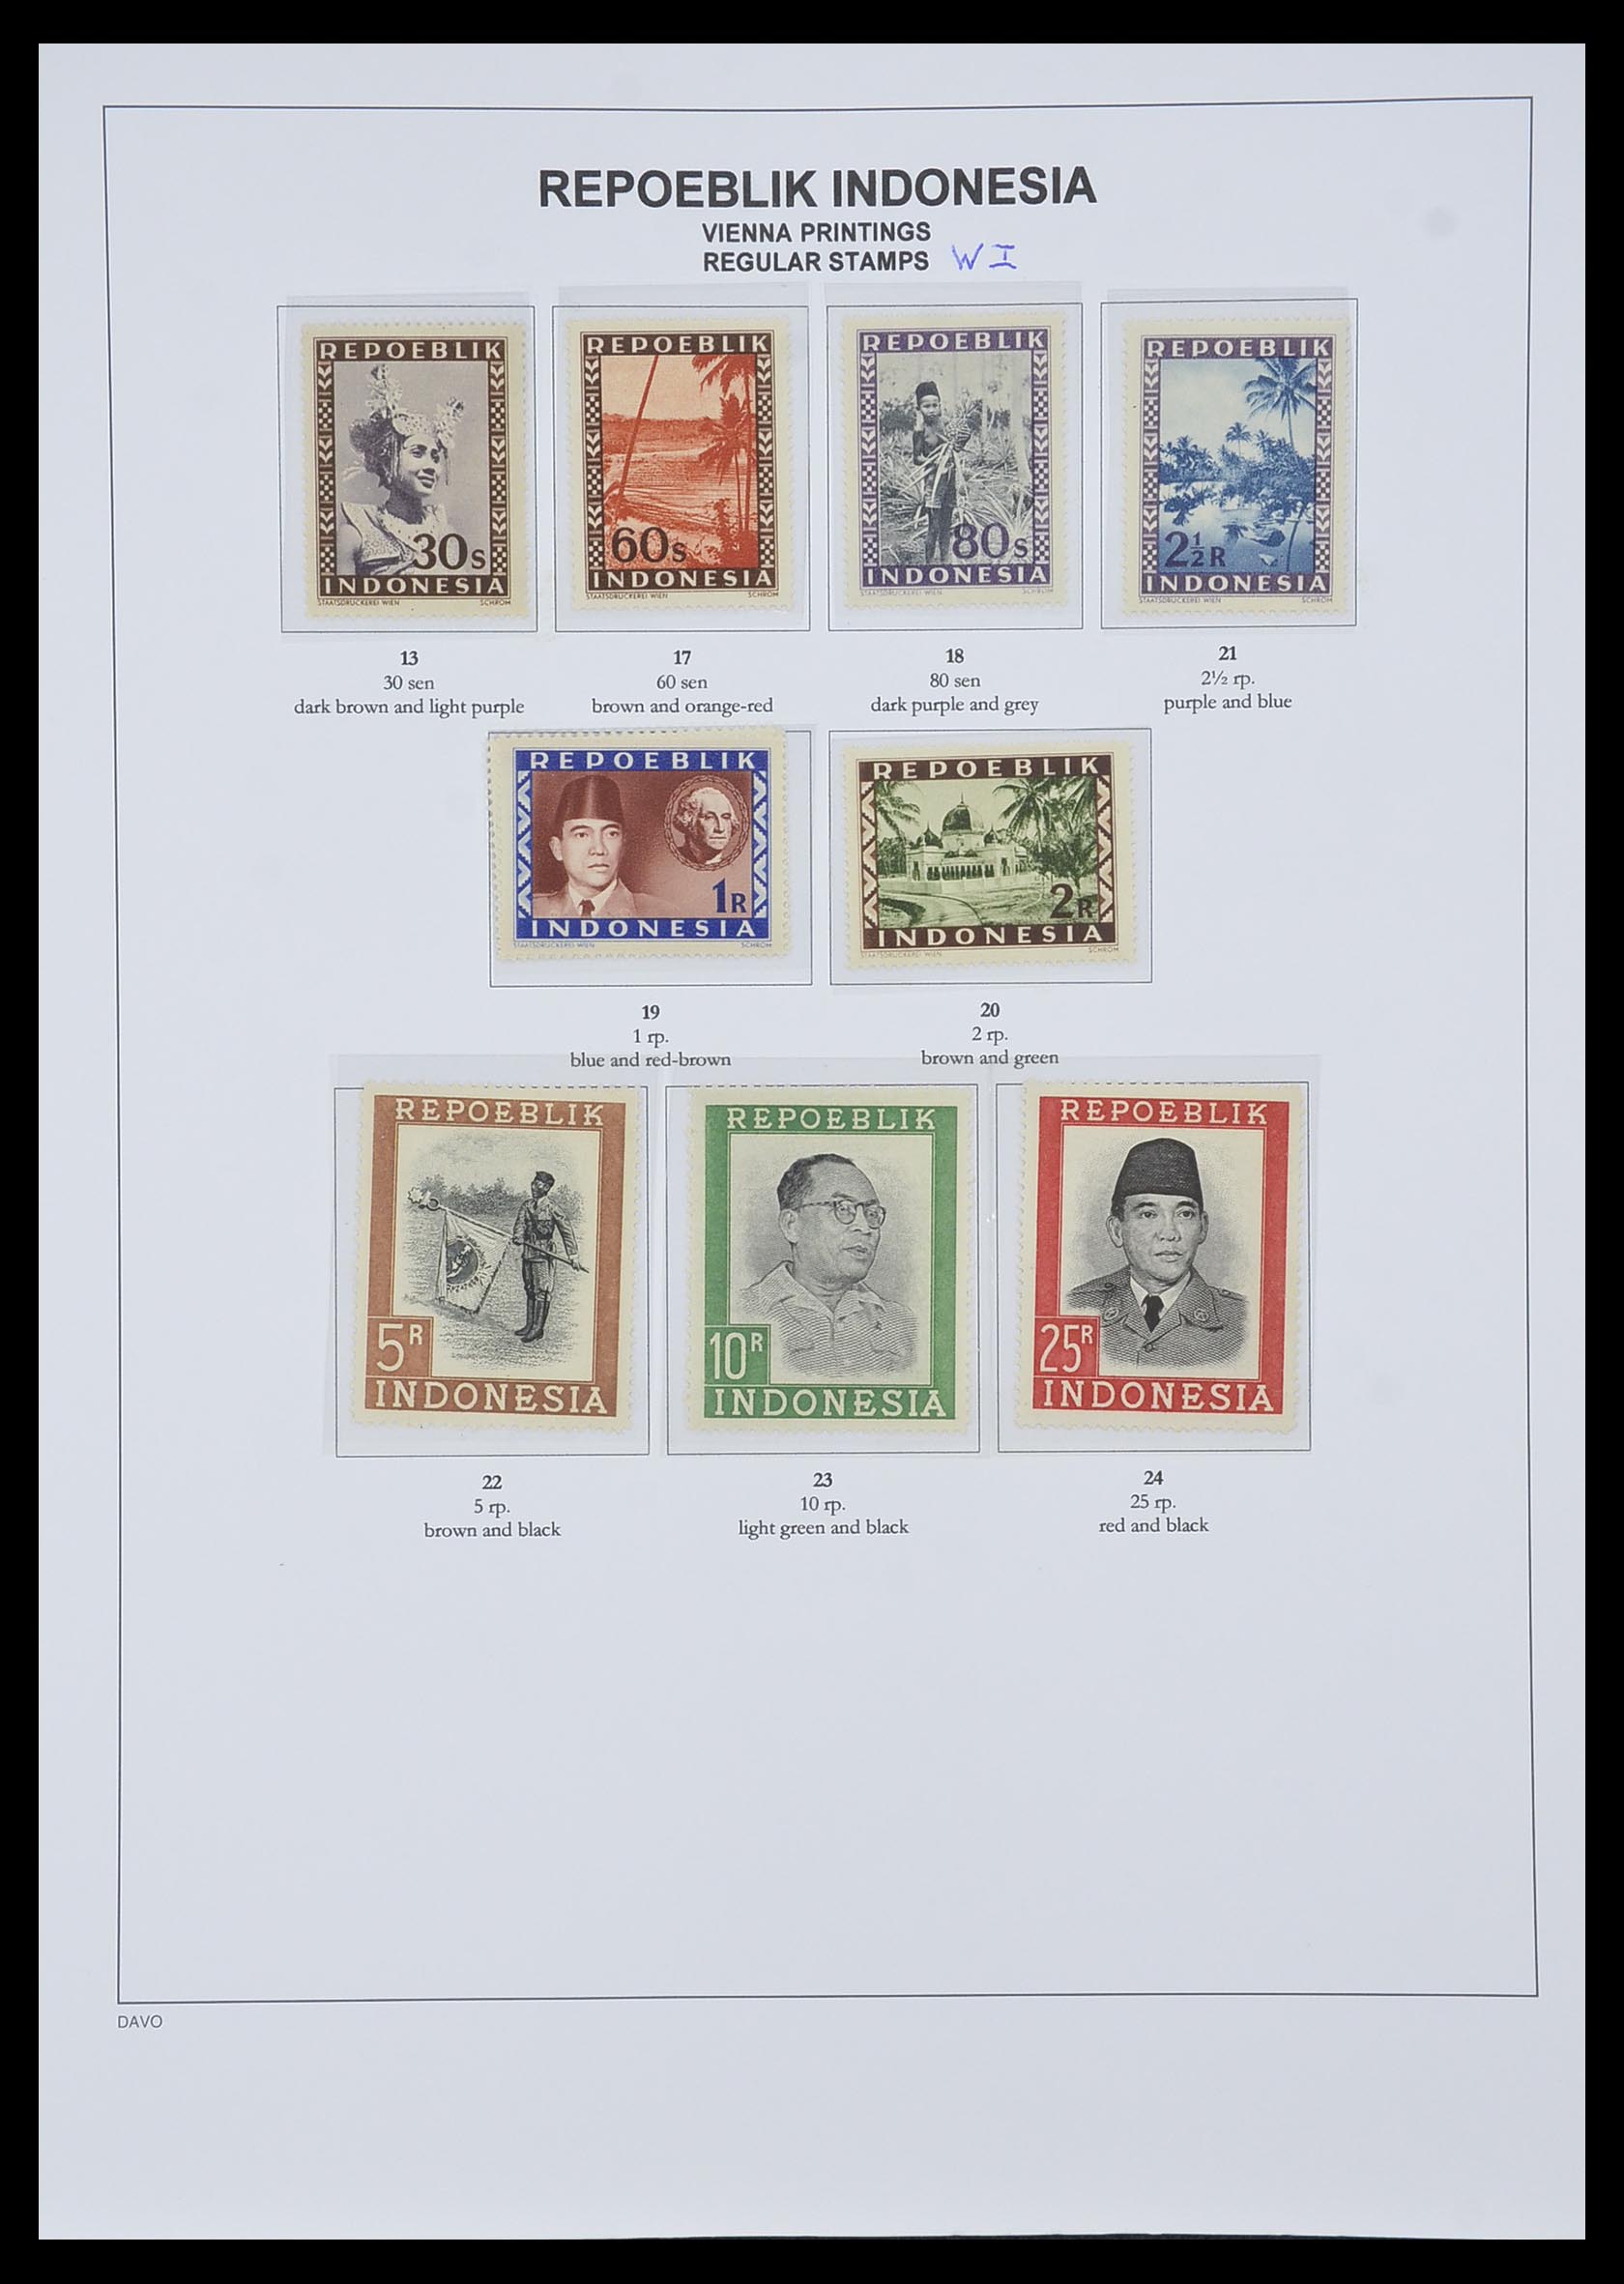 33988 010 - Stamp collection 33988 Vienna printings Indonesia.